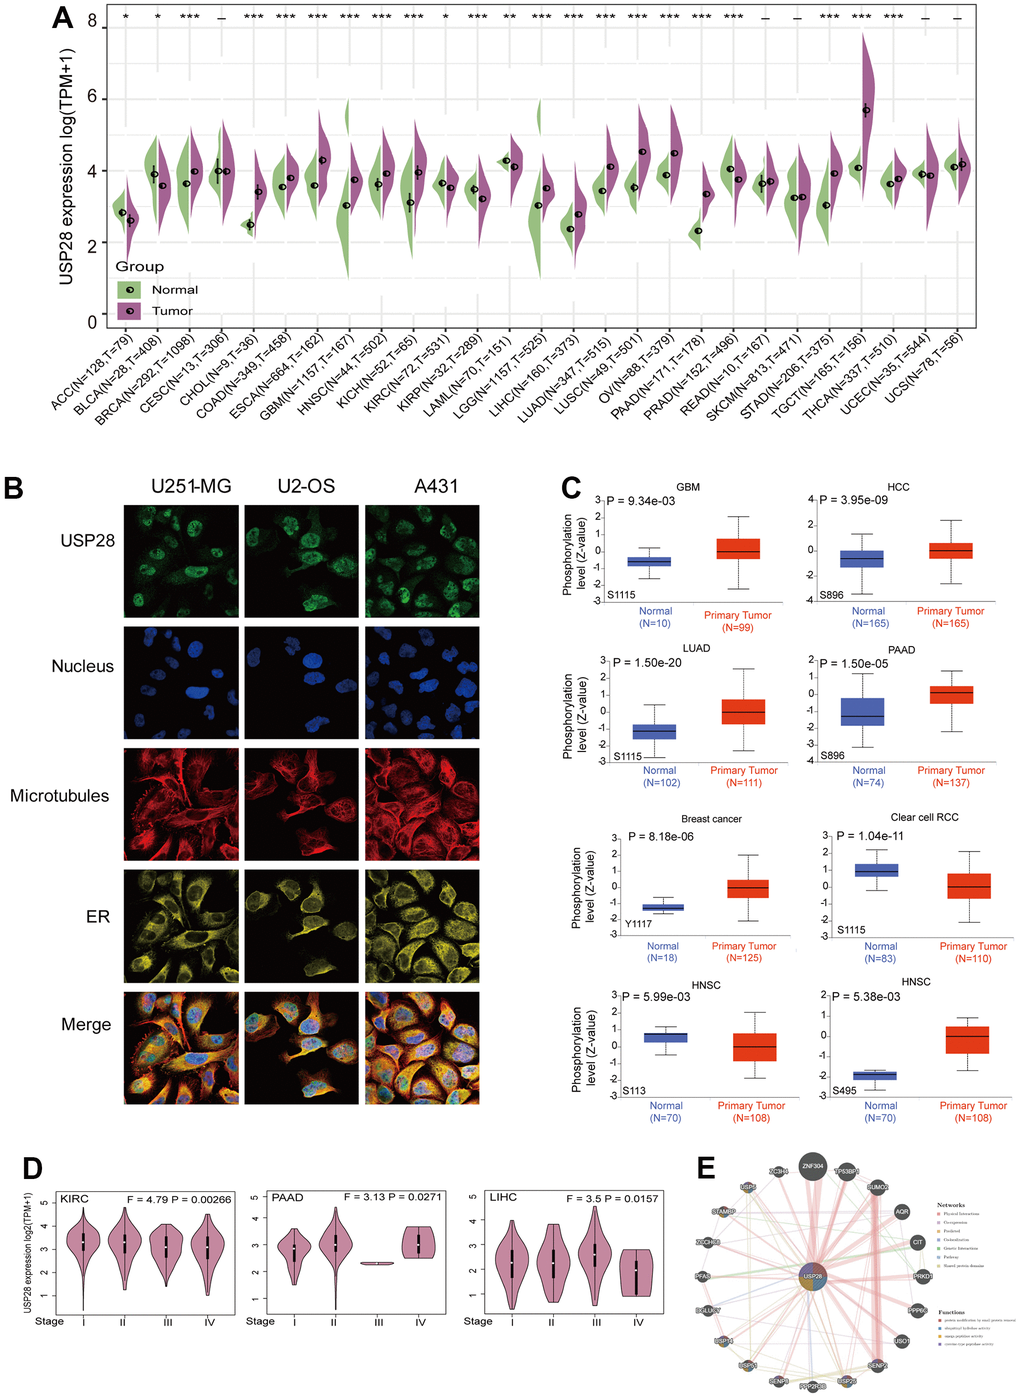 Clinical landscape of USP28 expression levels in pan-cancer. (A) The difference in USP28 expression between tumor and normal tissues in different cancers through TCGA and GTEx datasets. (B) The immunofluorescence images of the USP28 protein, nucleus, endoplasmic reticulum (ER), microtubules, and the merged images in U251-MG, U2-OS, and A431 cell lines. (C) Based on the CPTAC dataset, the expression level of USP28 phosphoprotein, including Y1117, S1115, S896, S113, and S495, between normal tissue and primary tissue of selected tumors via the UALCAN. (D) The correlation of USP28 expression levels with pathological stages (stage I stage II, stage III, stage IV) was analyzed using the TCGA dataset. Log2 (TPM+1) was applied for the log scale. (E) PPI network to identify the USP28-interacting proteins using the GeneMANIA database. *p p p 